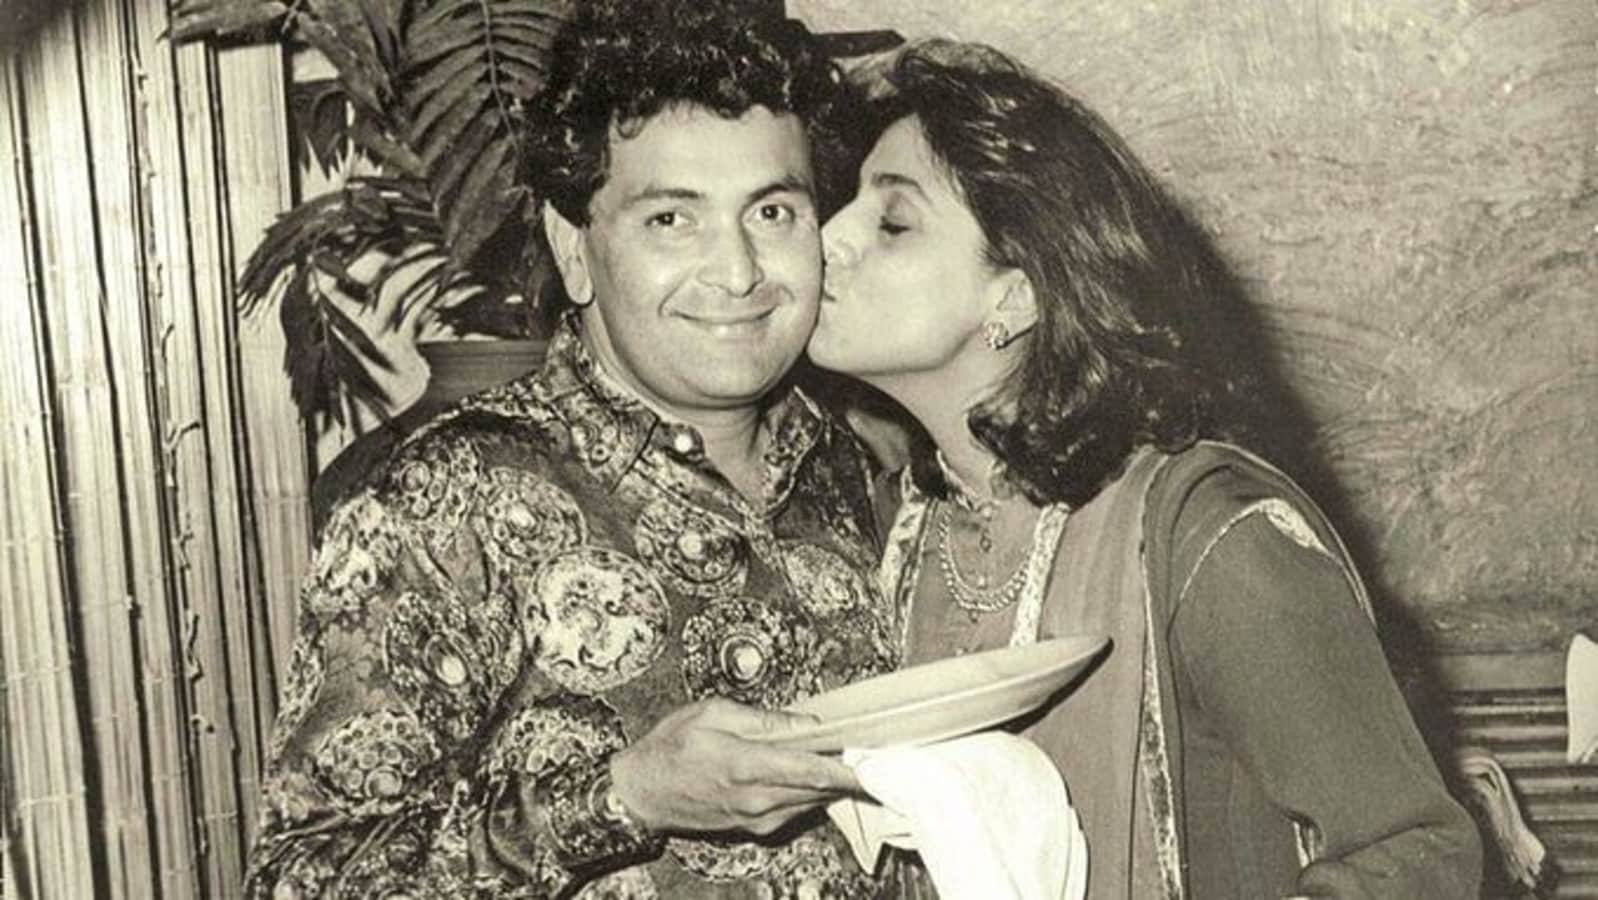 When Rishi Kapoor told Neetu Kapoor: 'I'll only date you, never get married to you' | Bollywood - Hindustan Times